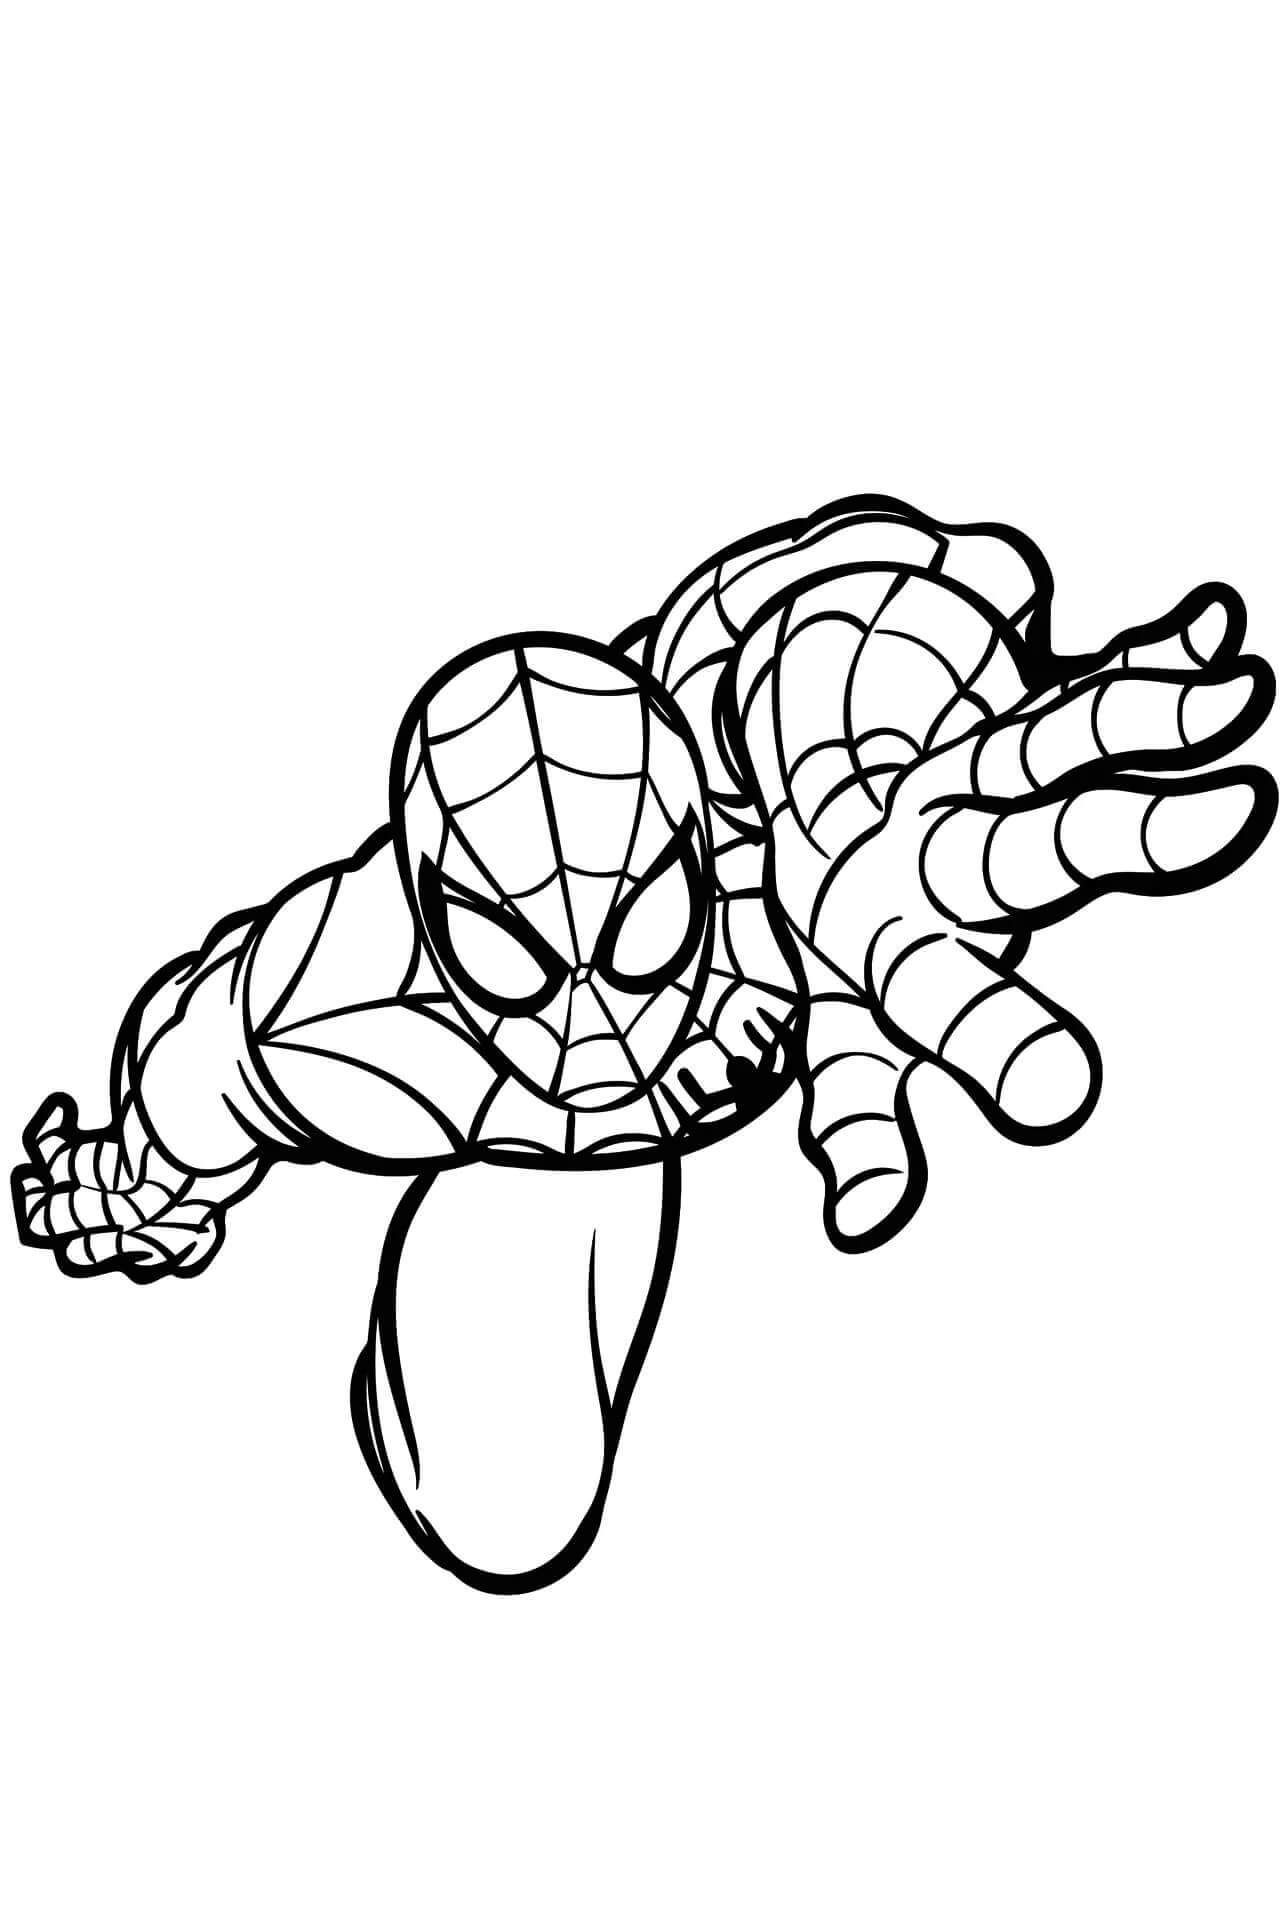 Spiderman 8 coloring page